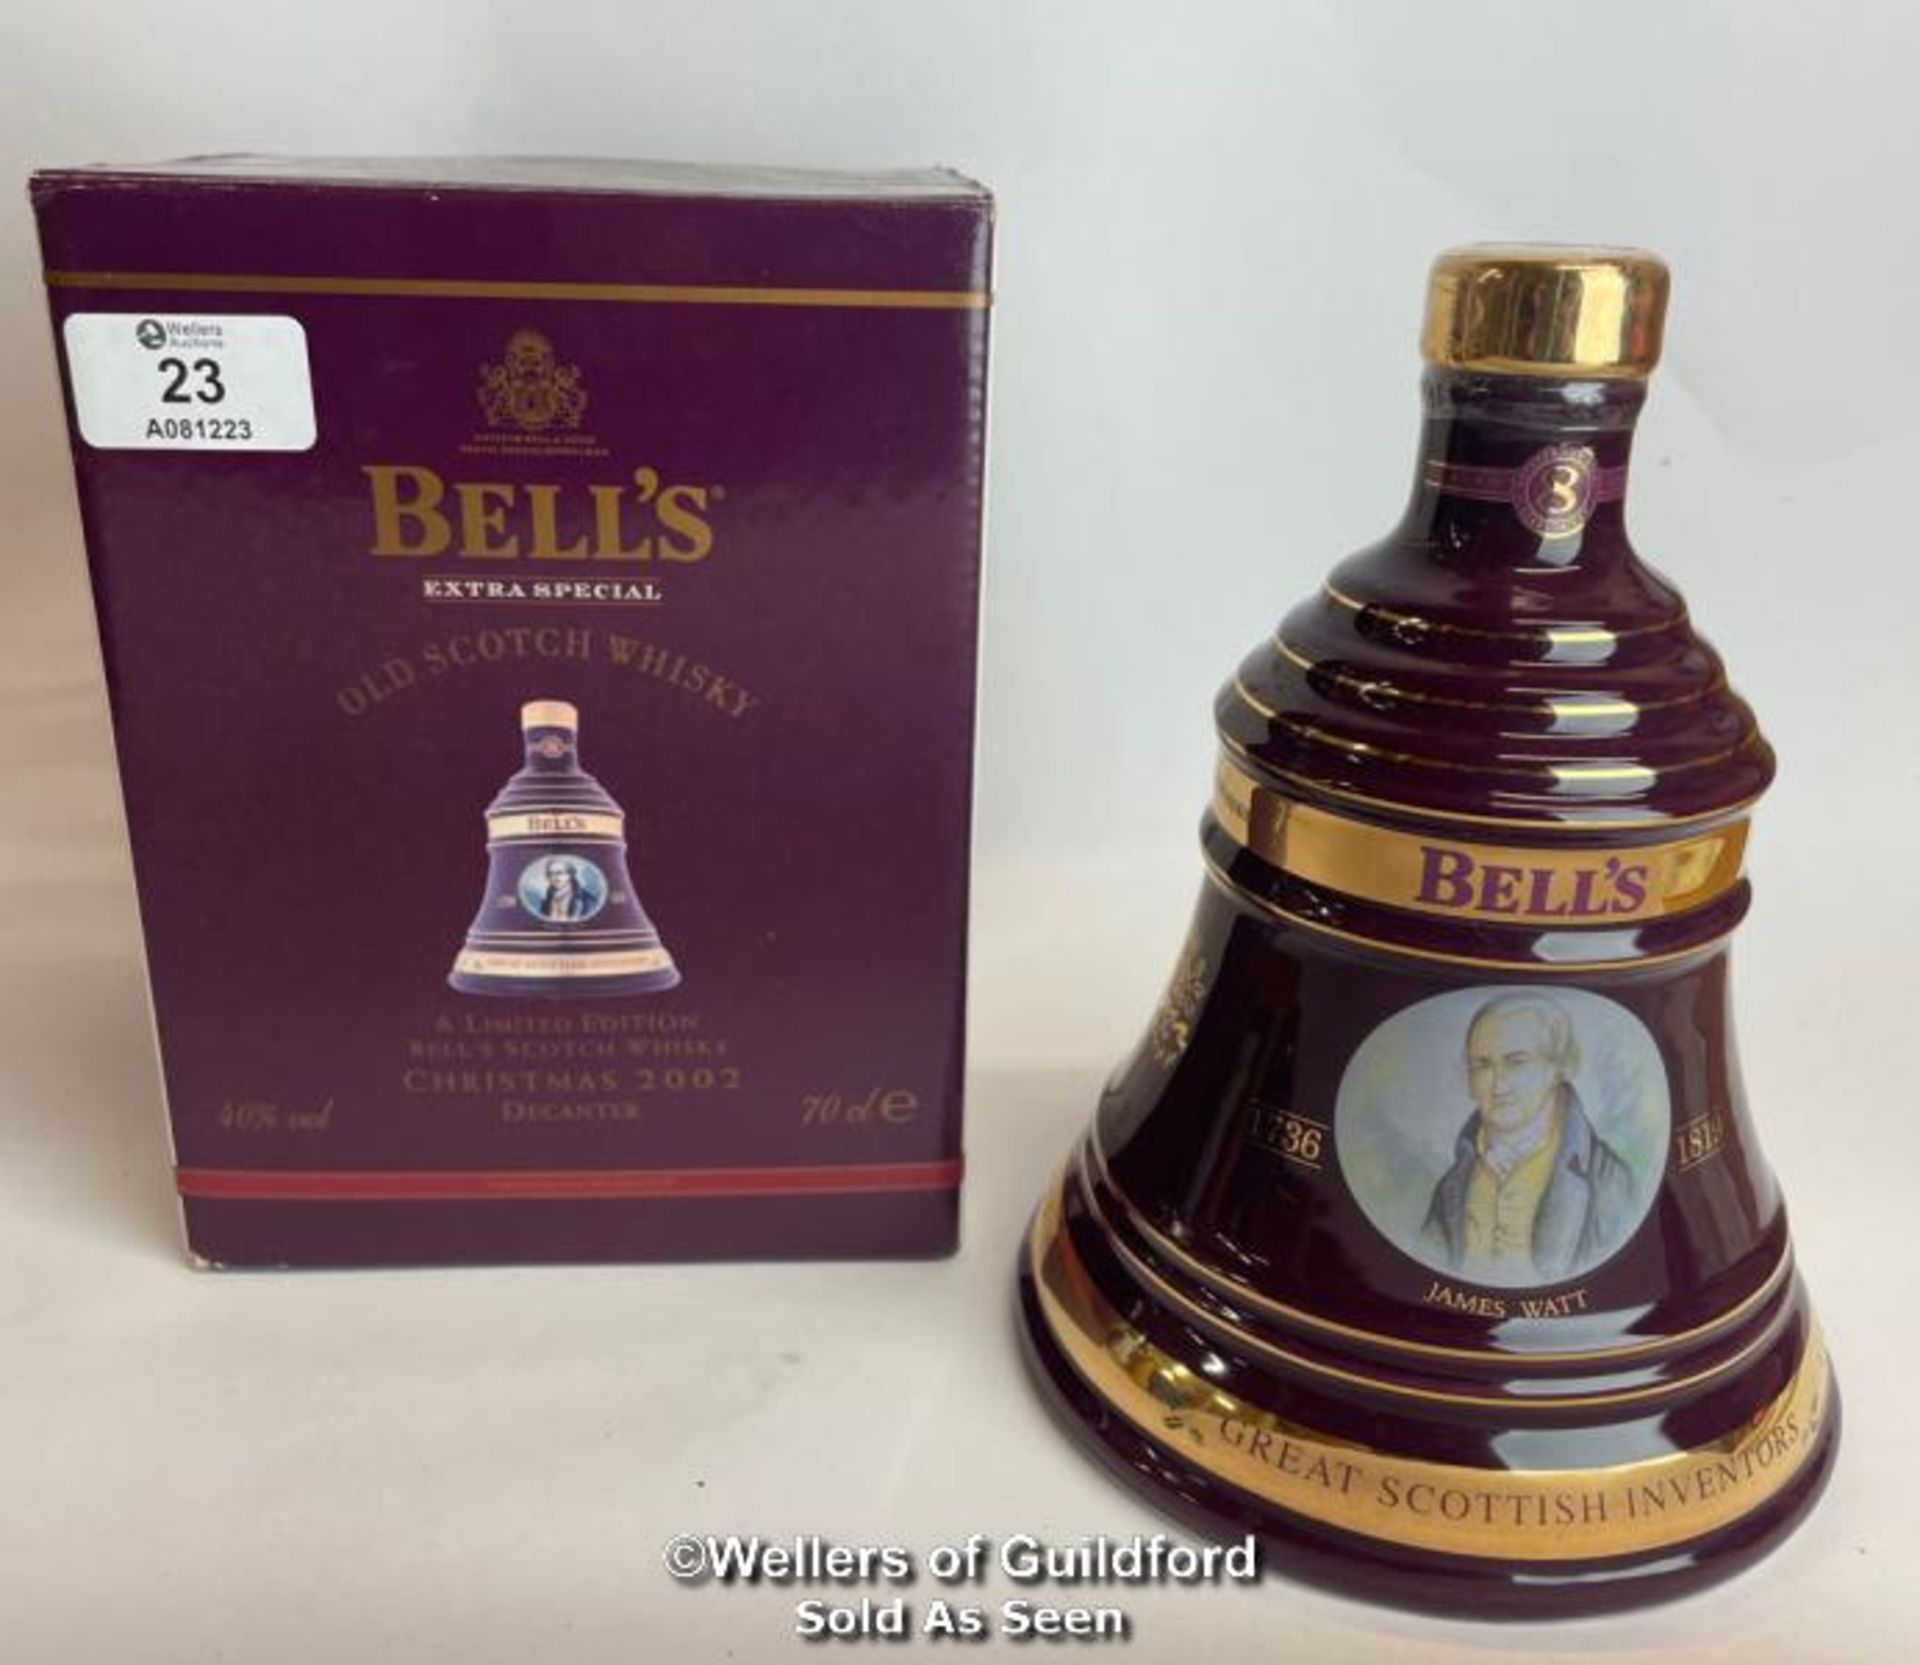 Bell's 2002 Old Scotch Whisky Limited Edition Christmas Decanter, Aged 8 Years, Brand New and Boxed, - Image 2 of 8